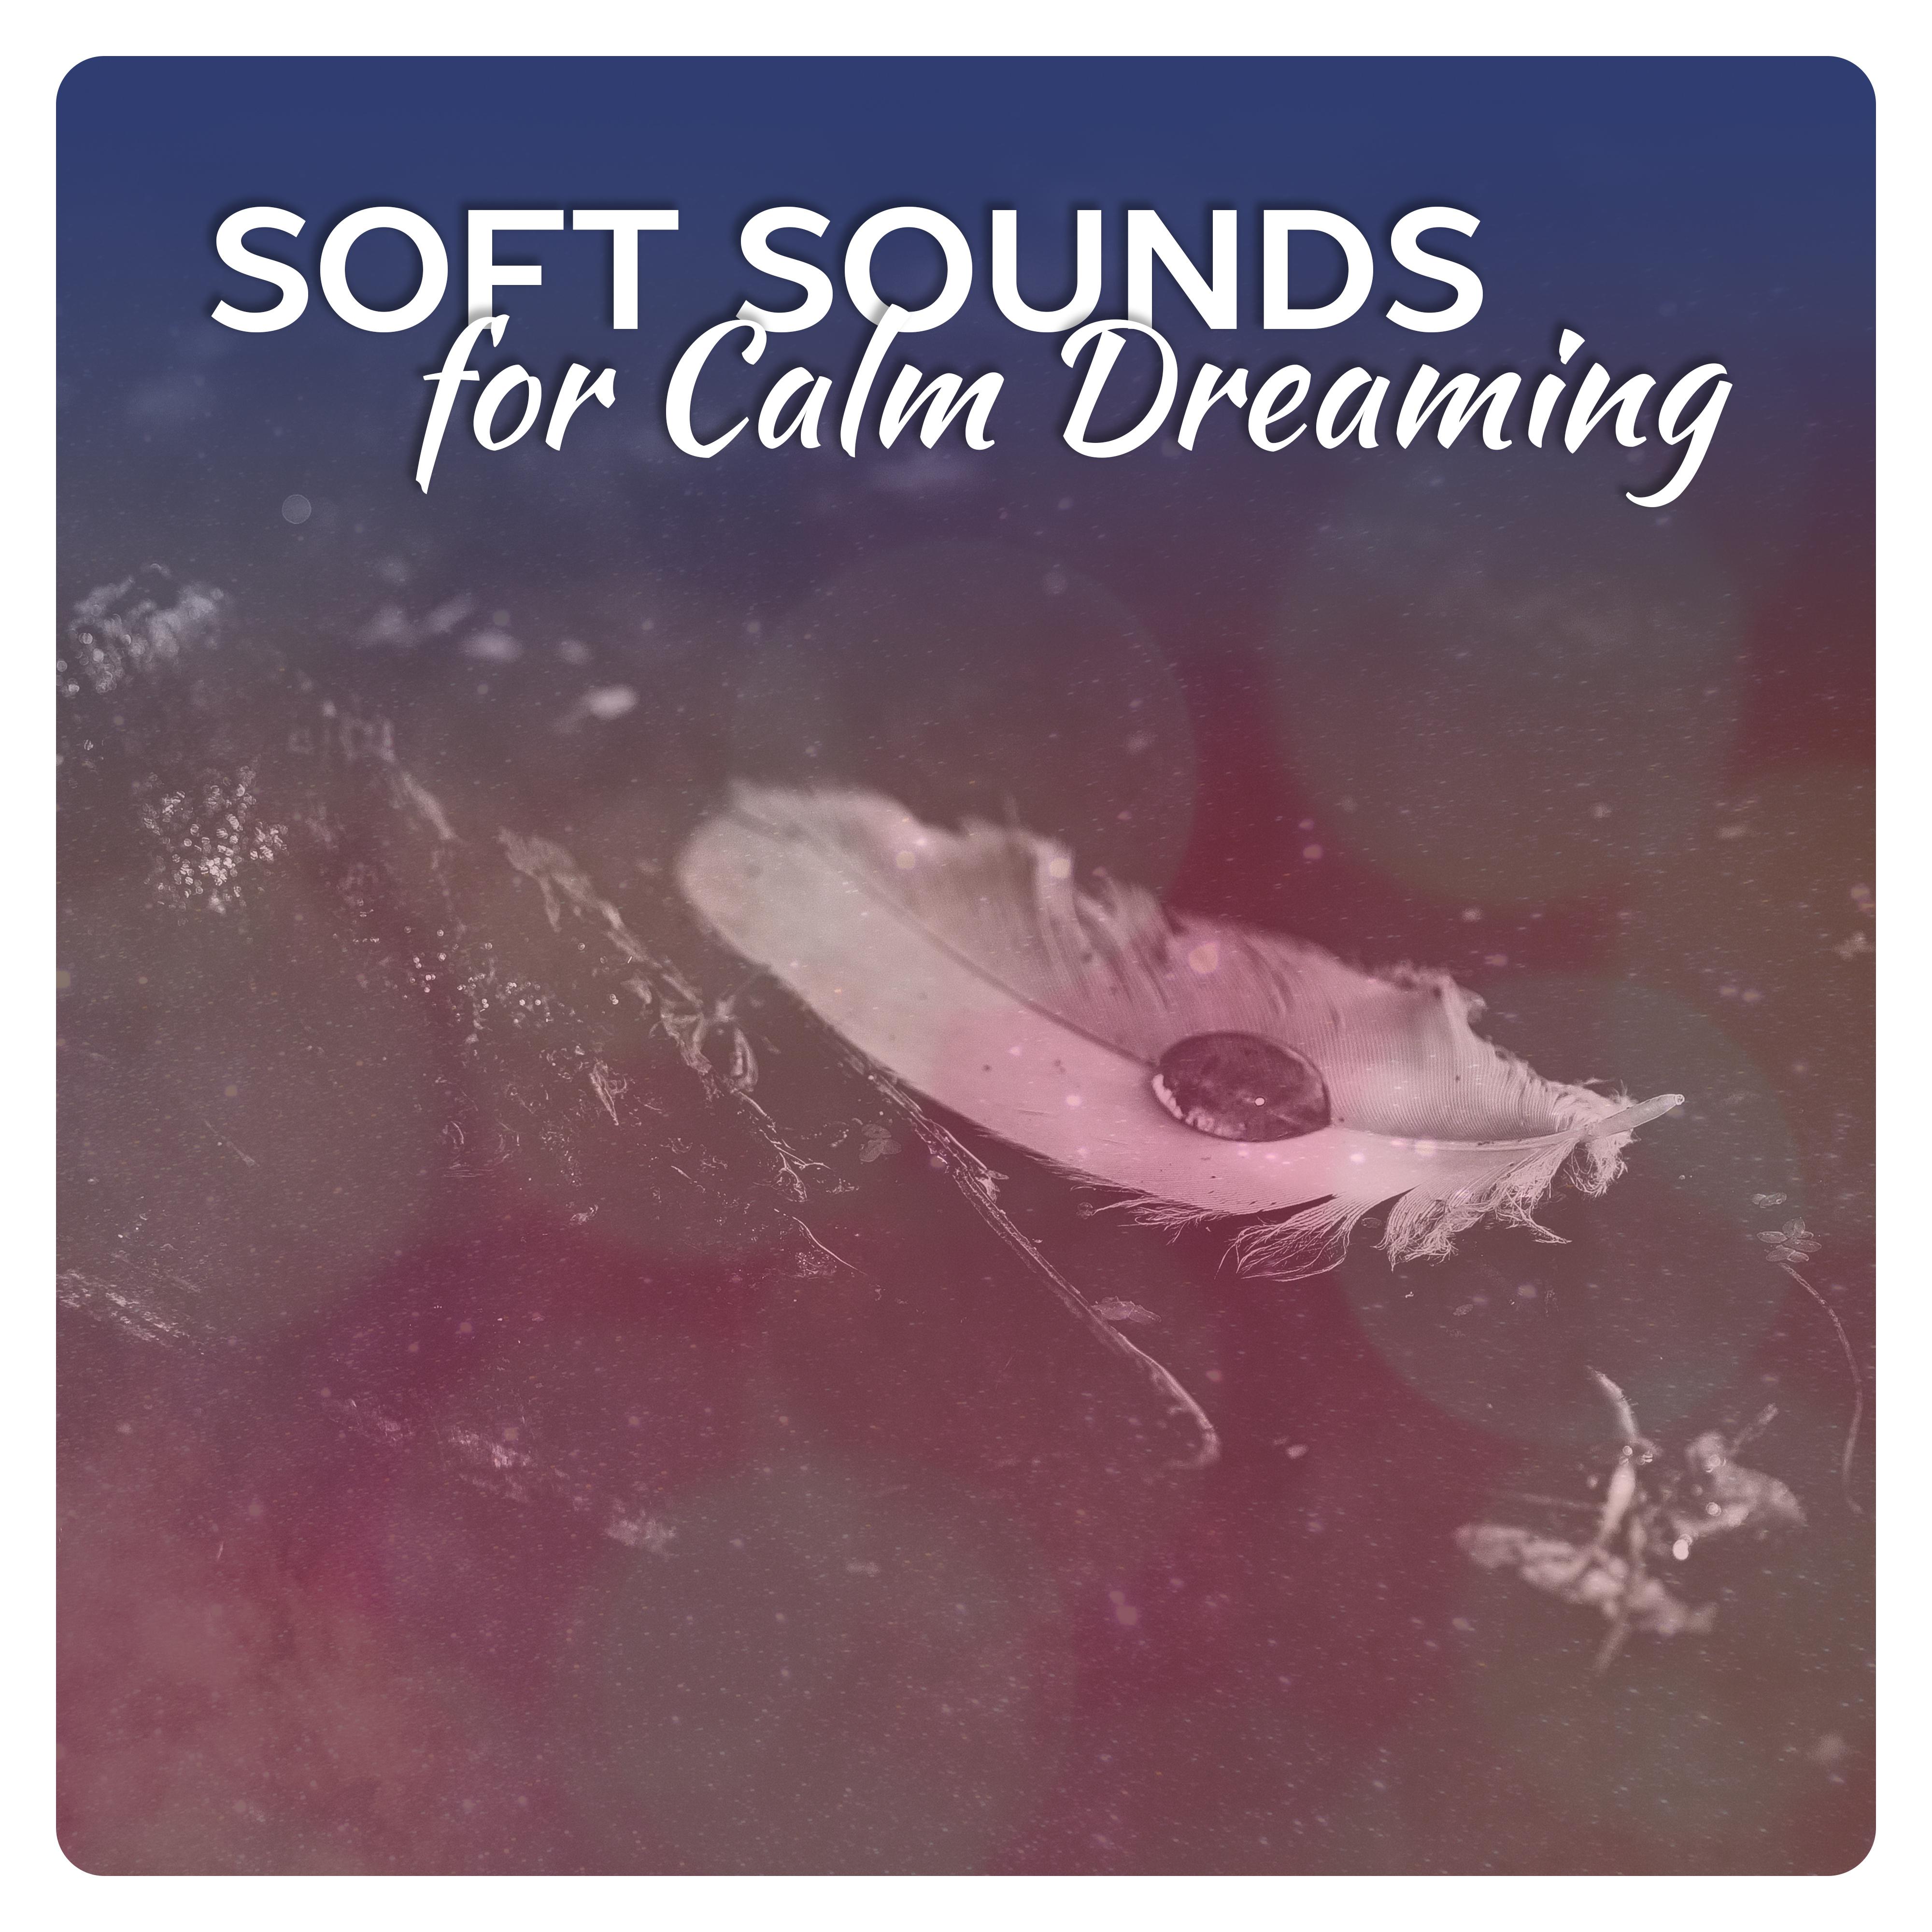 Soft Sounds for Calm Dreaming  Relaxing New Age Music, Sounds to Rest, Sleeping Hours, Easy Listening